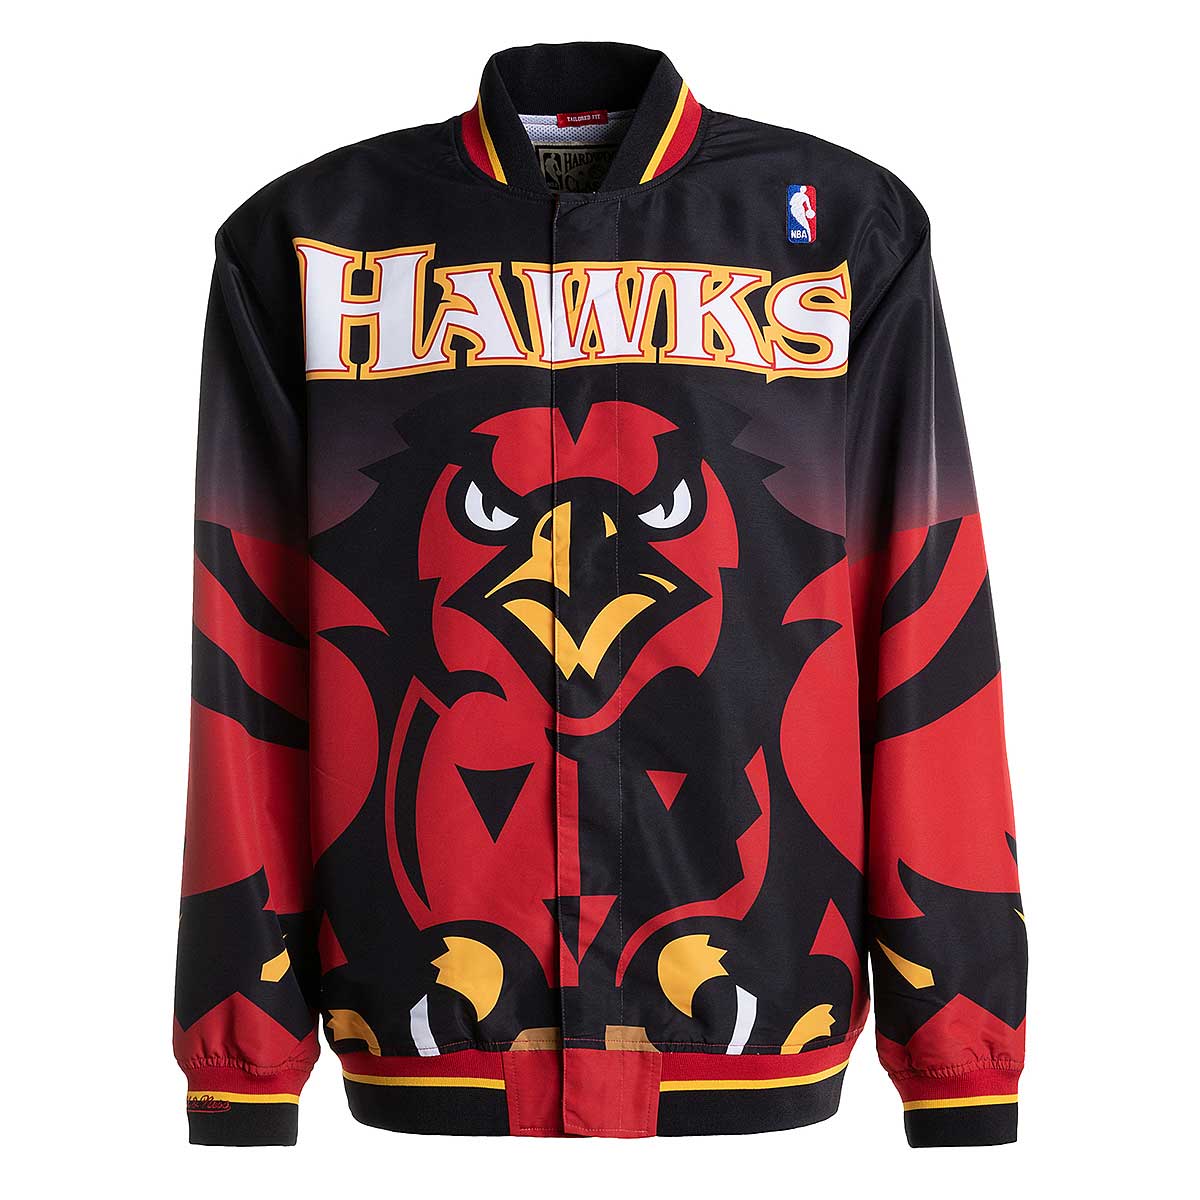 Mitchell And Ness Nba Authentic Warm Up Jackets Atlanta Hawks 1995 - 96, Black/Red